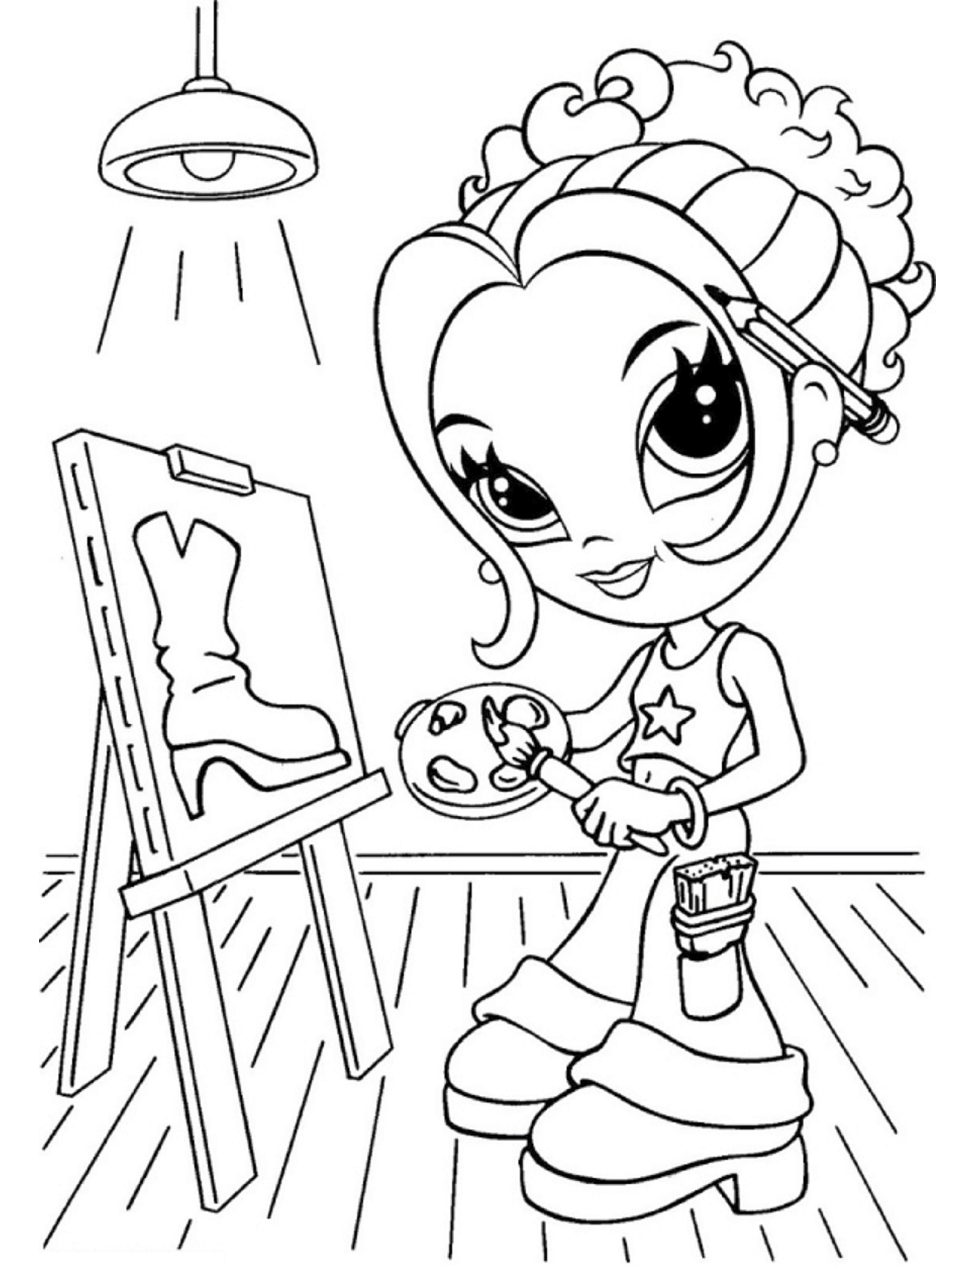 Glamour Girl Painting Coloring Page - Free Printable Coloring Pages for